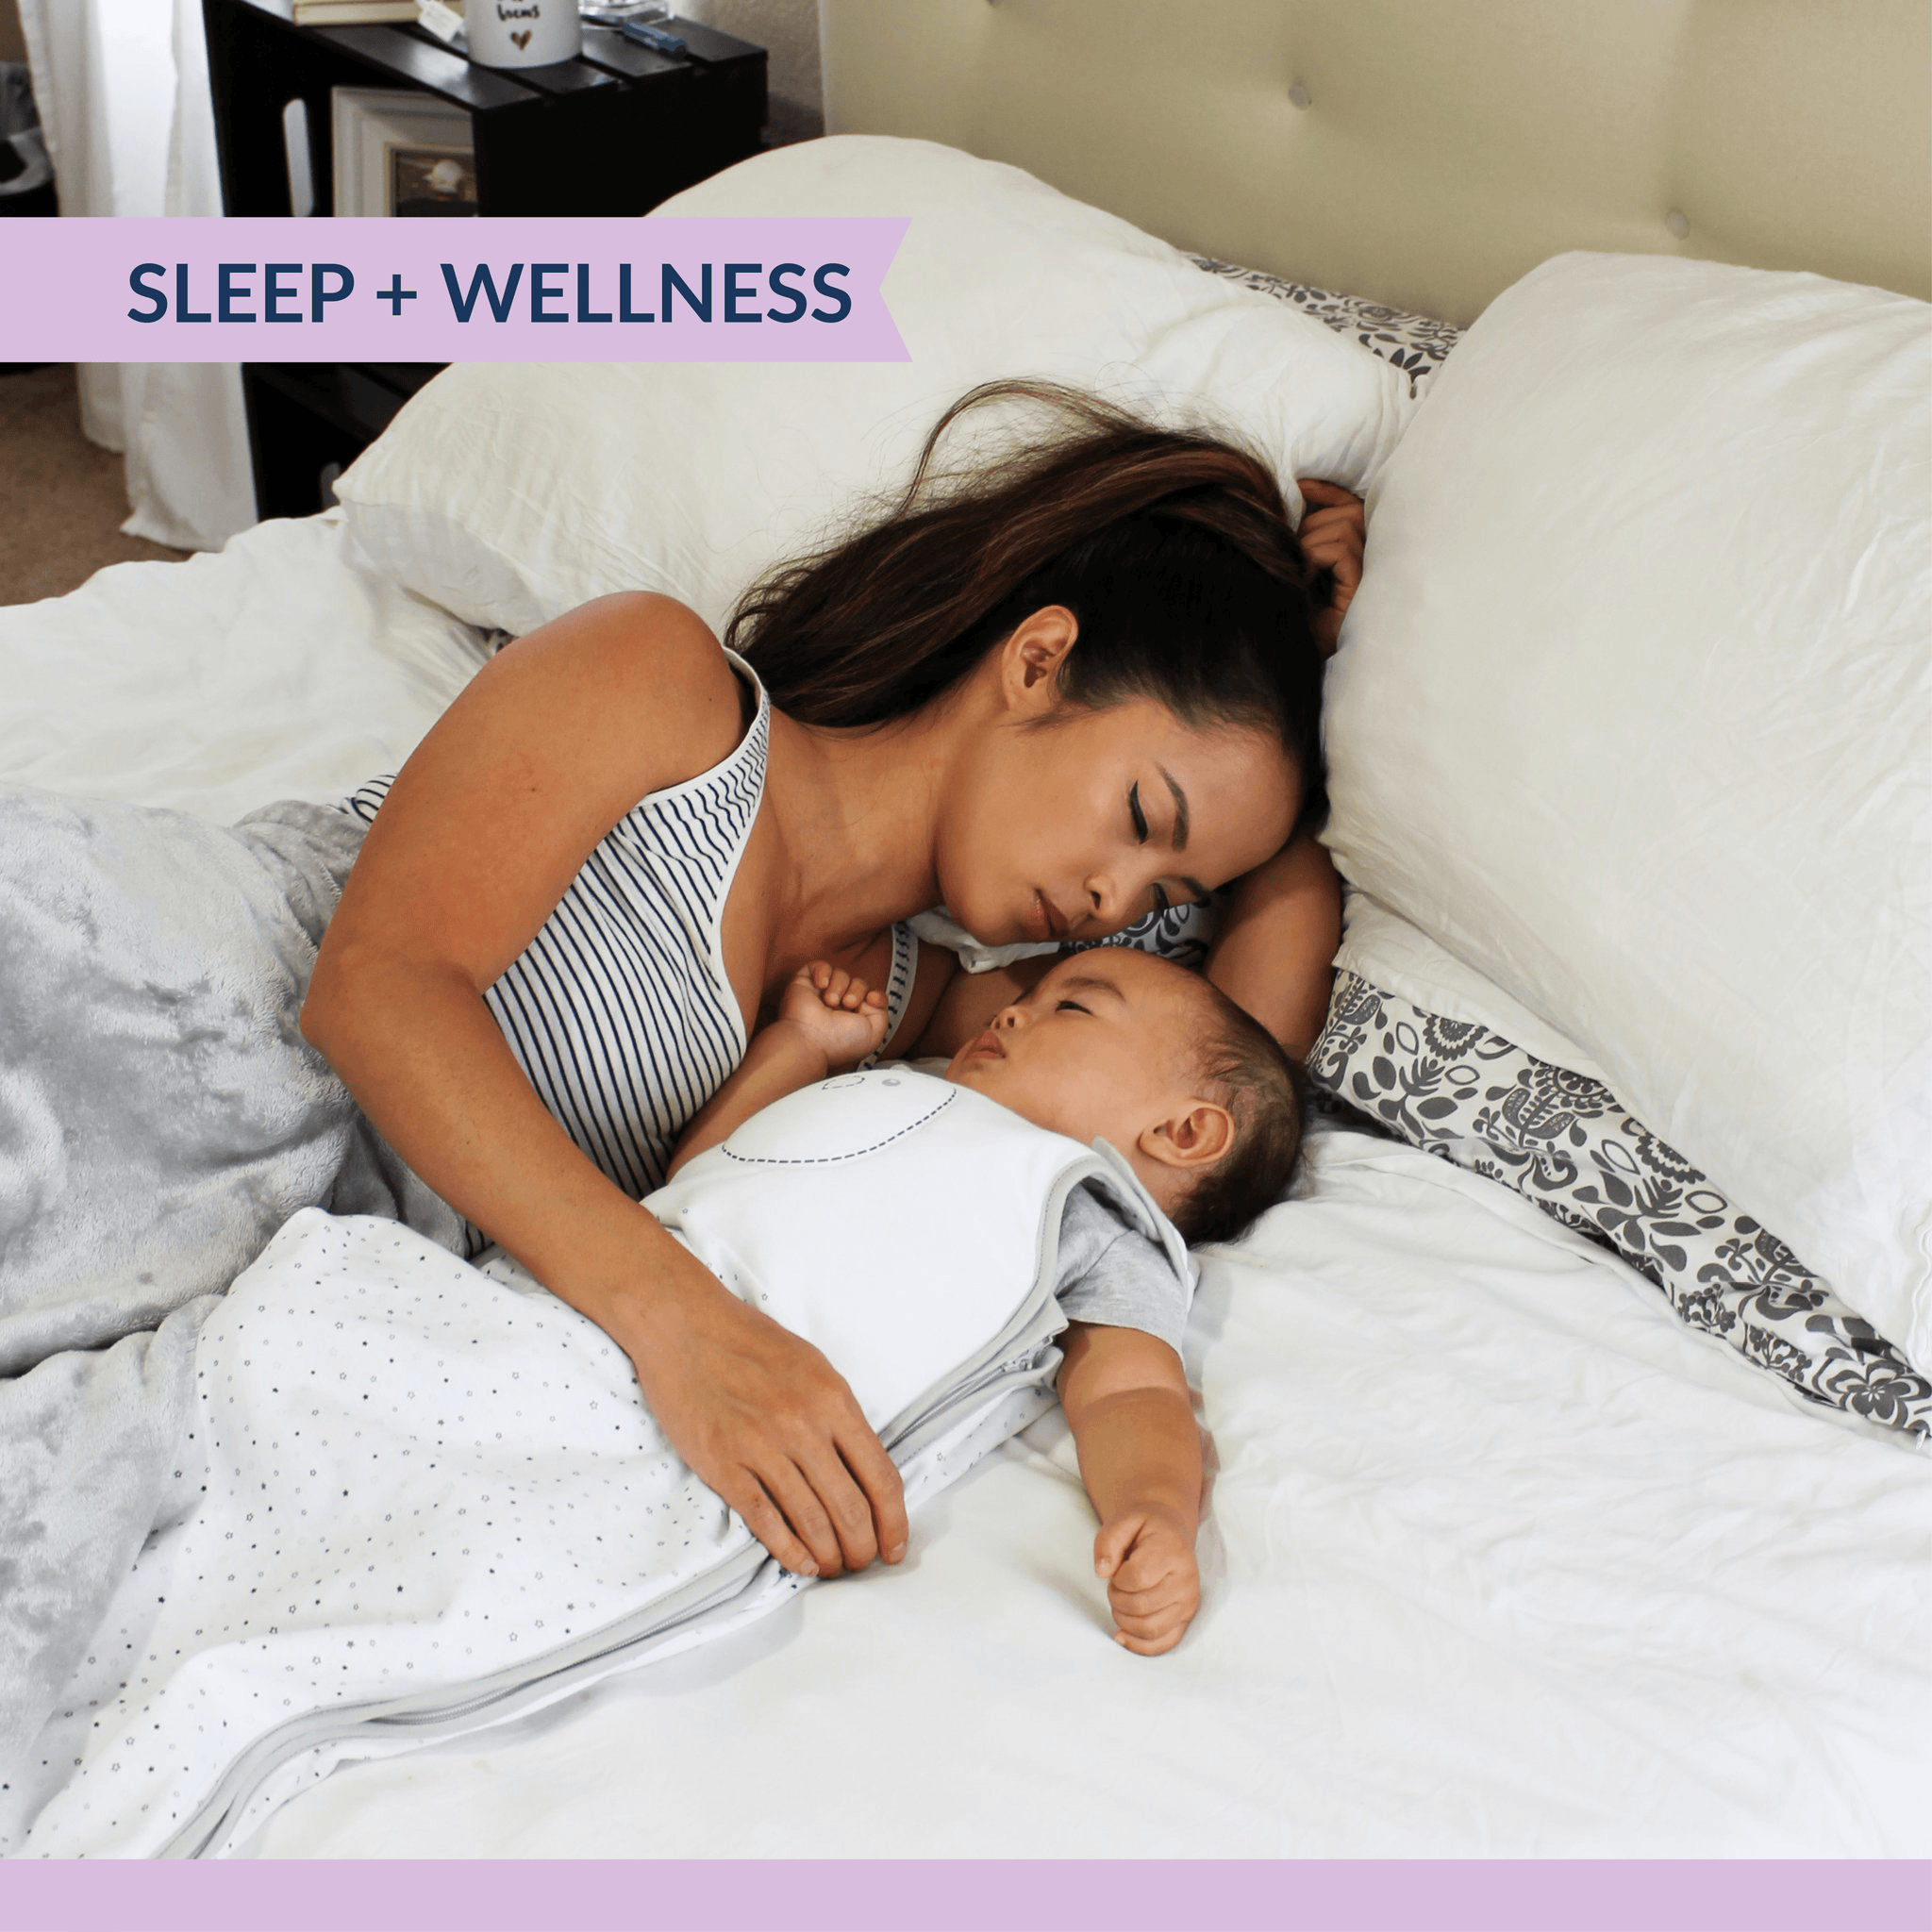 Touchy subjects: co-sleeping pros & cons